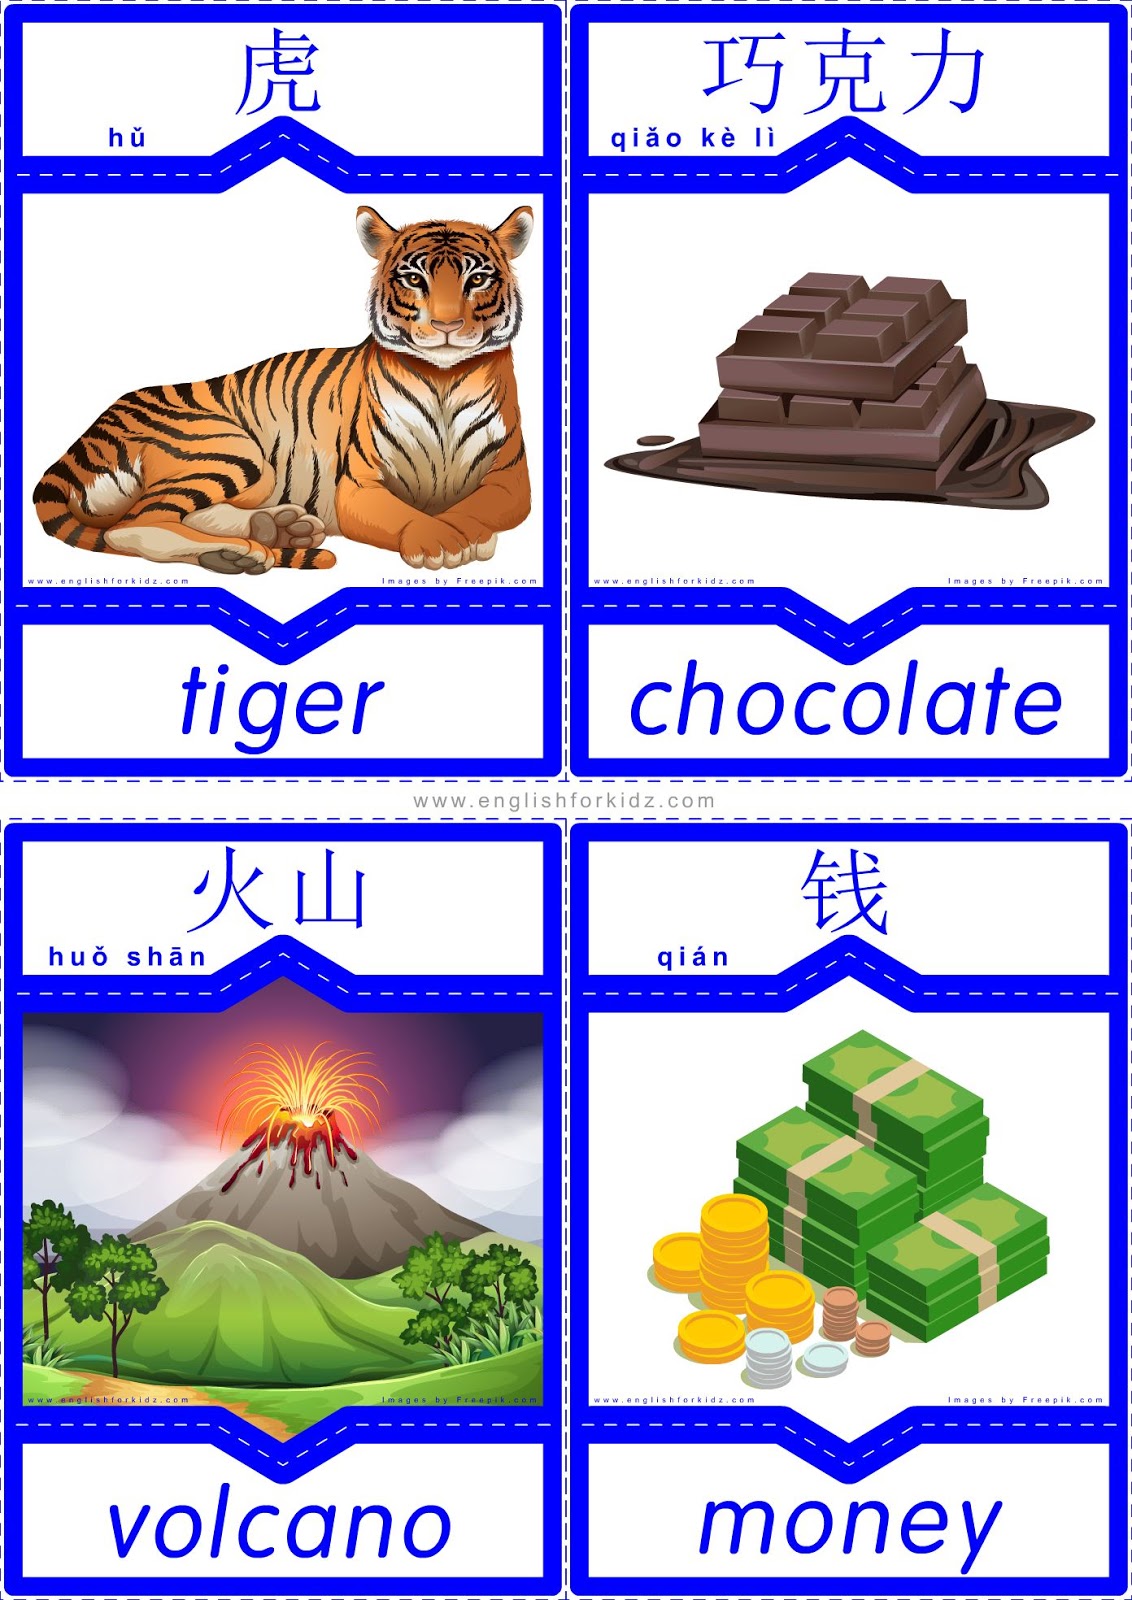 English for Kids Step by Step: 700+ English-Chinese Flashcards